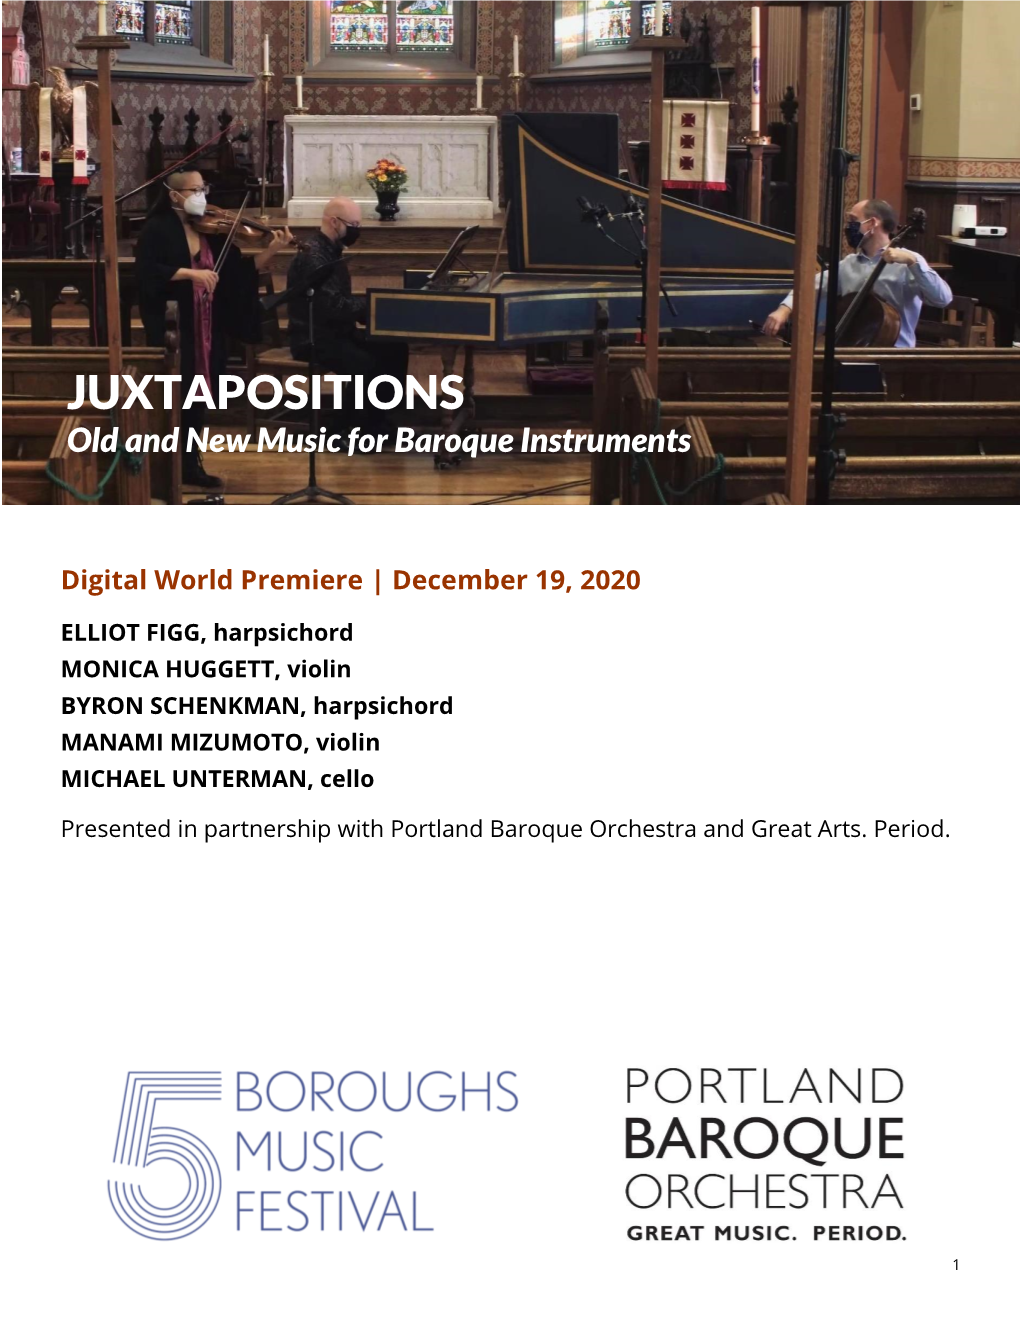 JUXTAPOSITIONS Old and New Music for Baroque Instruments